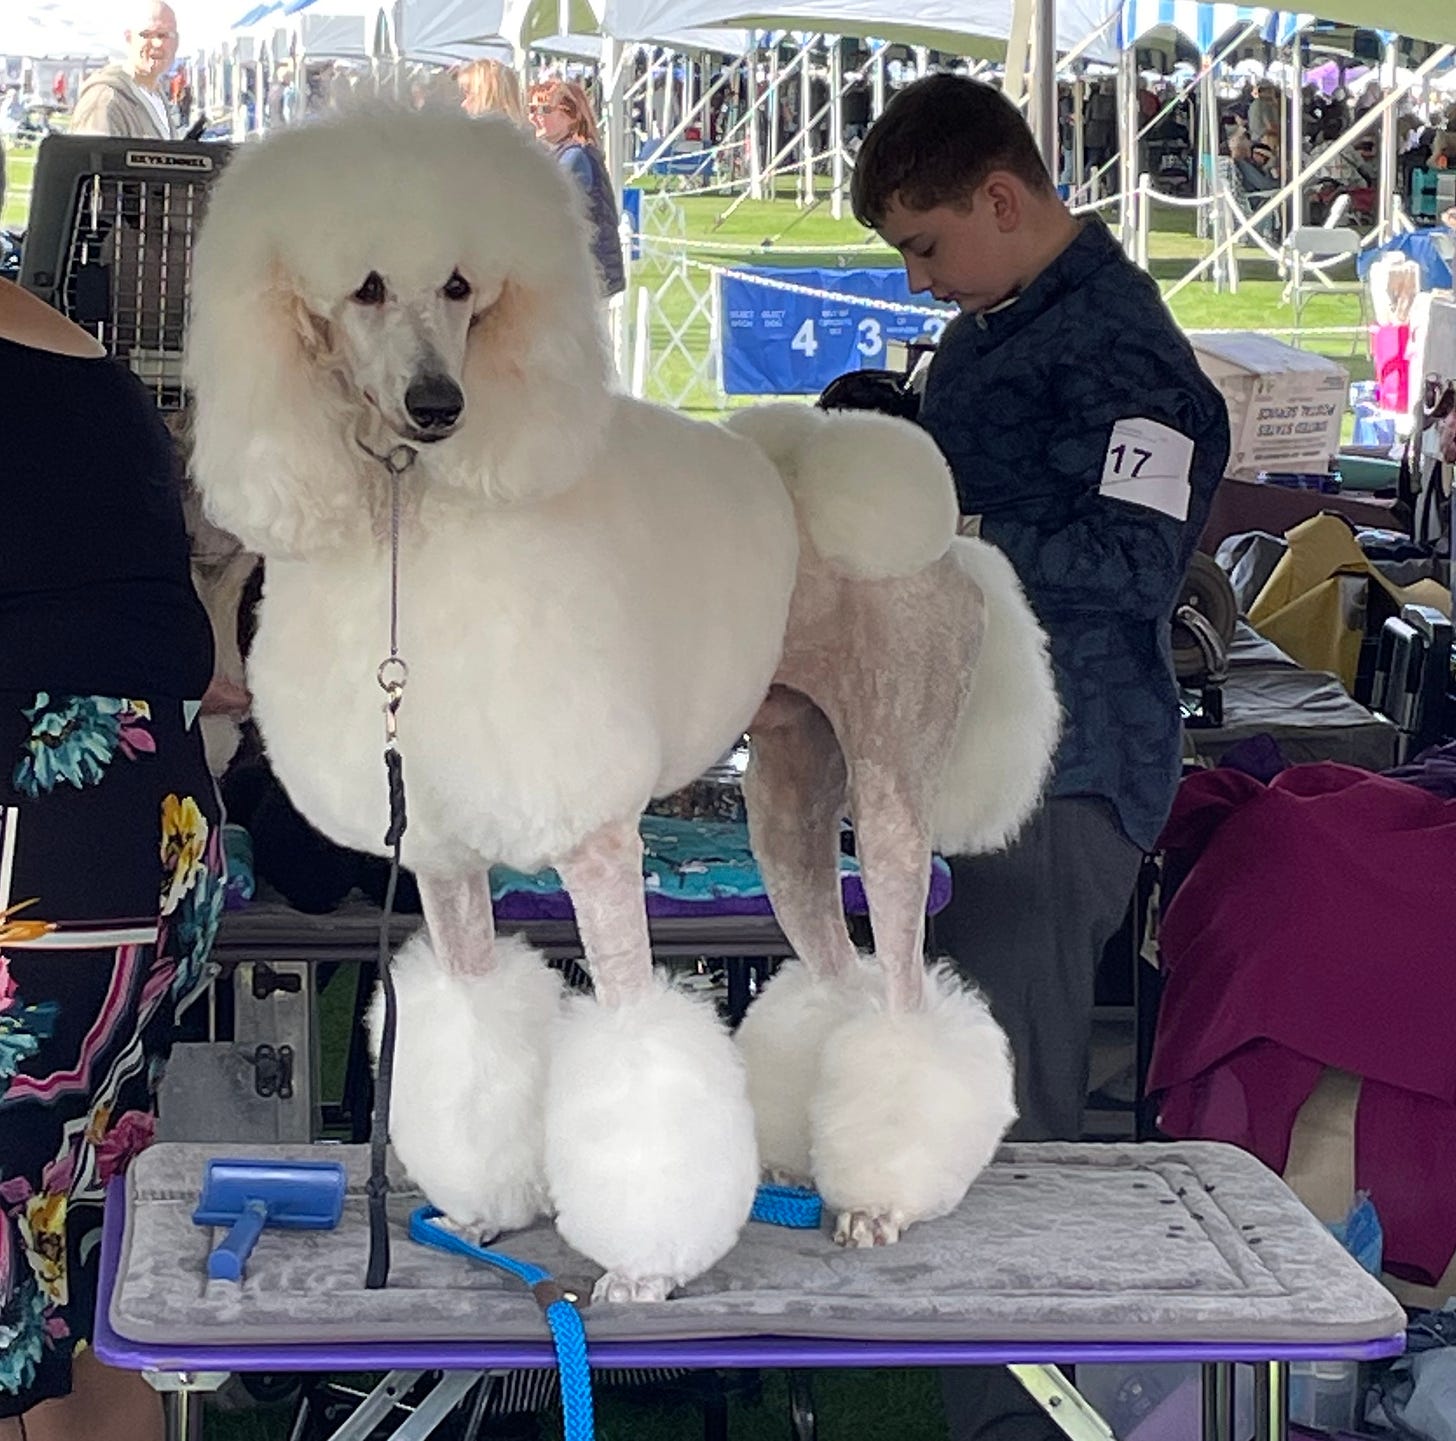 A very fluffy poodle, like from the movies.